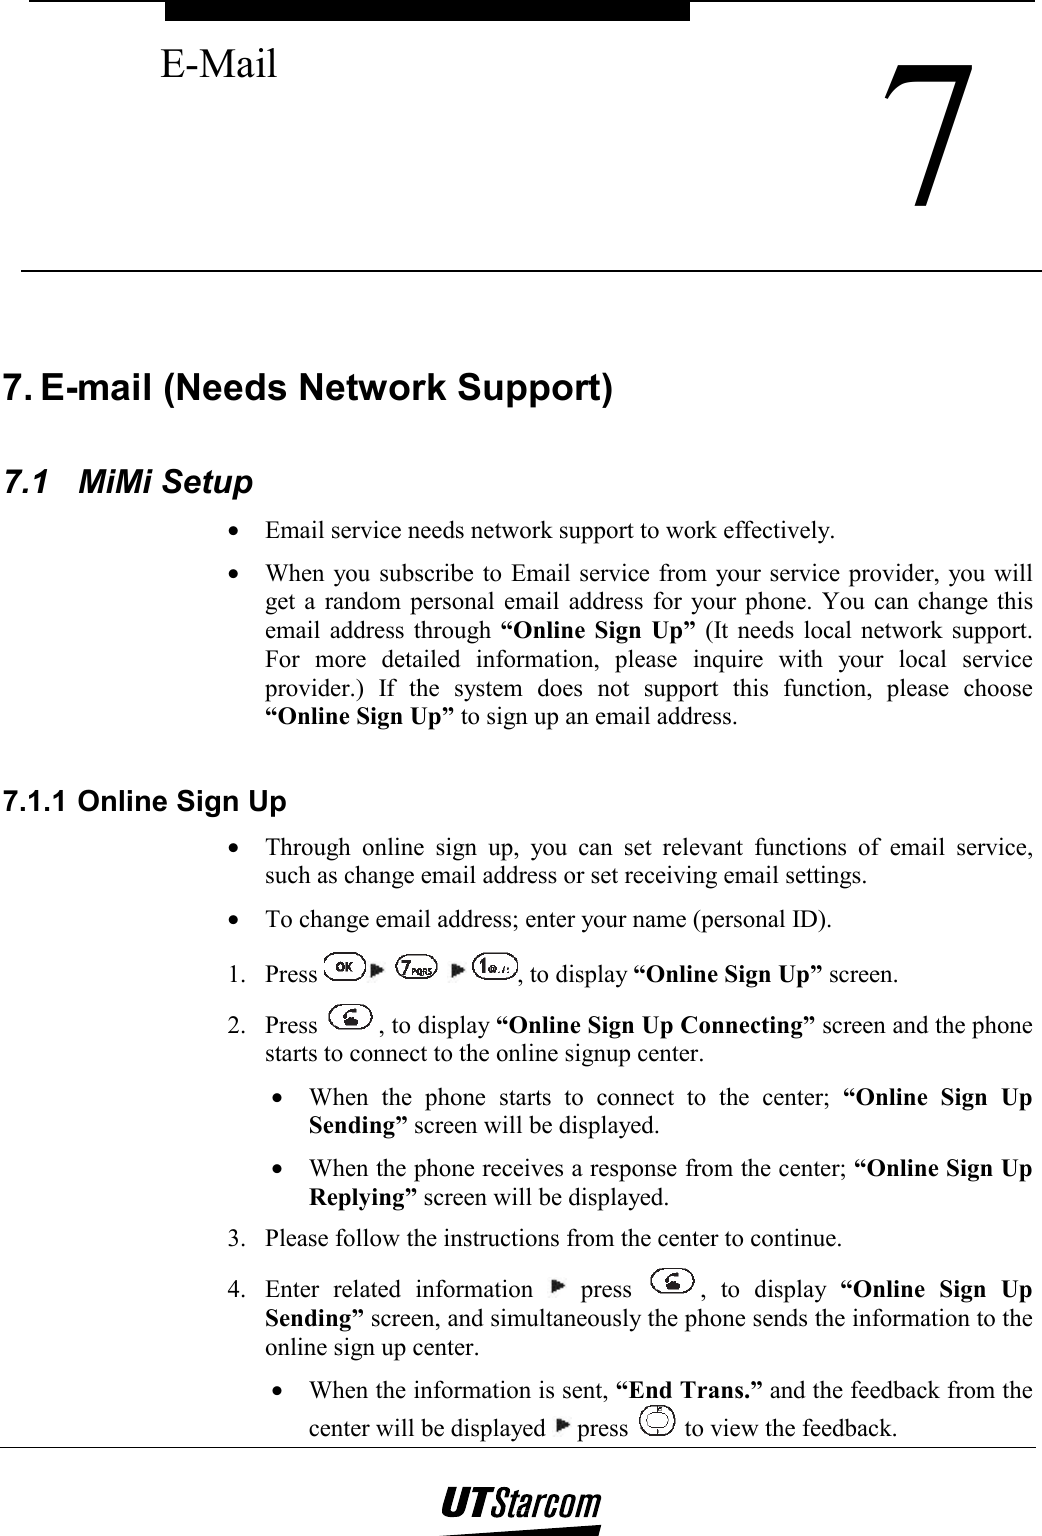  7 E-Mail    7. E-mail (Needs Network Support)  7.1 MiMi Setup •  Email service needs network support to work effectively. •  When you subscribe to Email service from your service provider, you will get a random personal email address for your phone. You can change this email address through “Online Sign Up” (It needs local network support. For more detailed information, please inquire with your local service provider.) If the system does not support this function, please choose “Online Sign Up” to sign up an email address.  7.1.1 Online Sign Up •  Through online sign up, you can set relevant functions of email service, such as change email address or set receiving email settings. •  To change email address; enter your name (personal ID). 1. Press        , to display “Online Sign Up” screen. 2. Press  , to display “Online Sign Up Connecting” screen and the phone starts to connect to the online signup center. •  When the phone starts to connect to the center; “Online Sign Up Sending” screen will be displayed. •  When the phone receives a response from the center; “Online Sign Up Replying” screen will be displayed. 3.  Please follow the instructions from the center to continue. 4.  Enter related information   press  , to display “Online Sign Up Sending” screen, and simultaneously the phone sends the information to the online sign up center. •  When the information is sent, “End Trans.” and the feedback from the center will be displayed   press   to view the feedback. 